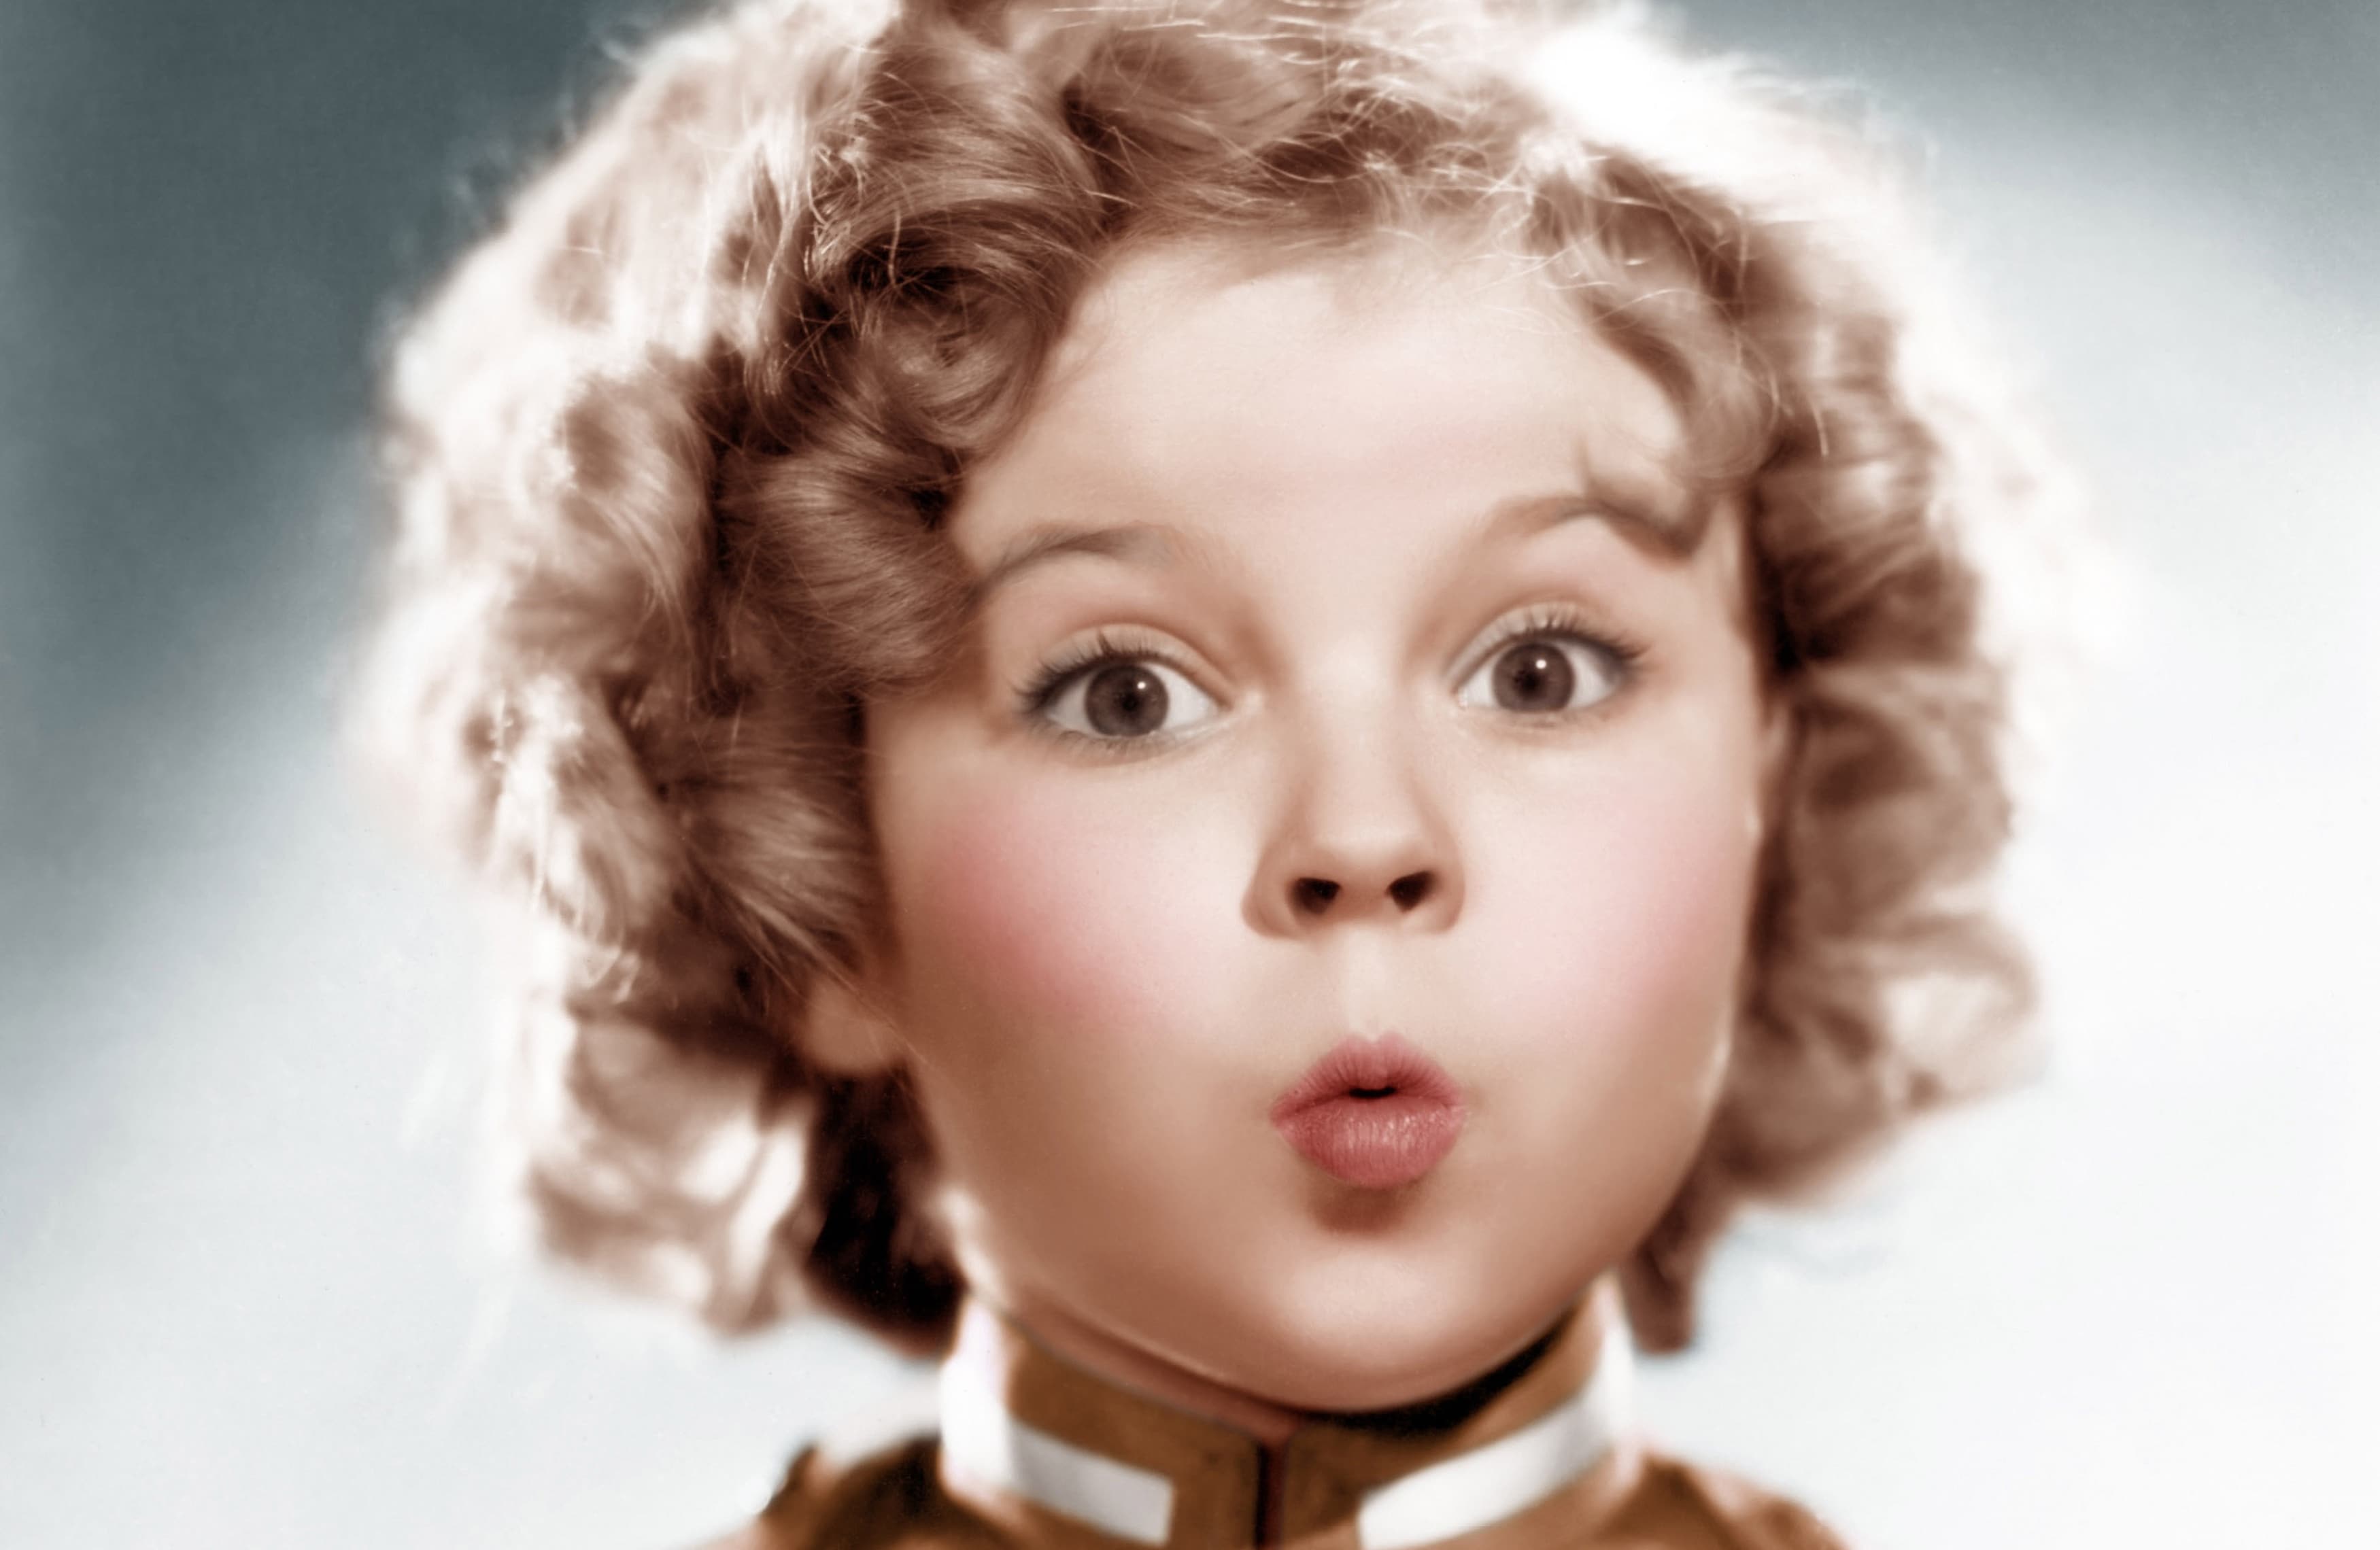 shirley temple hair color